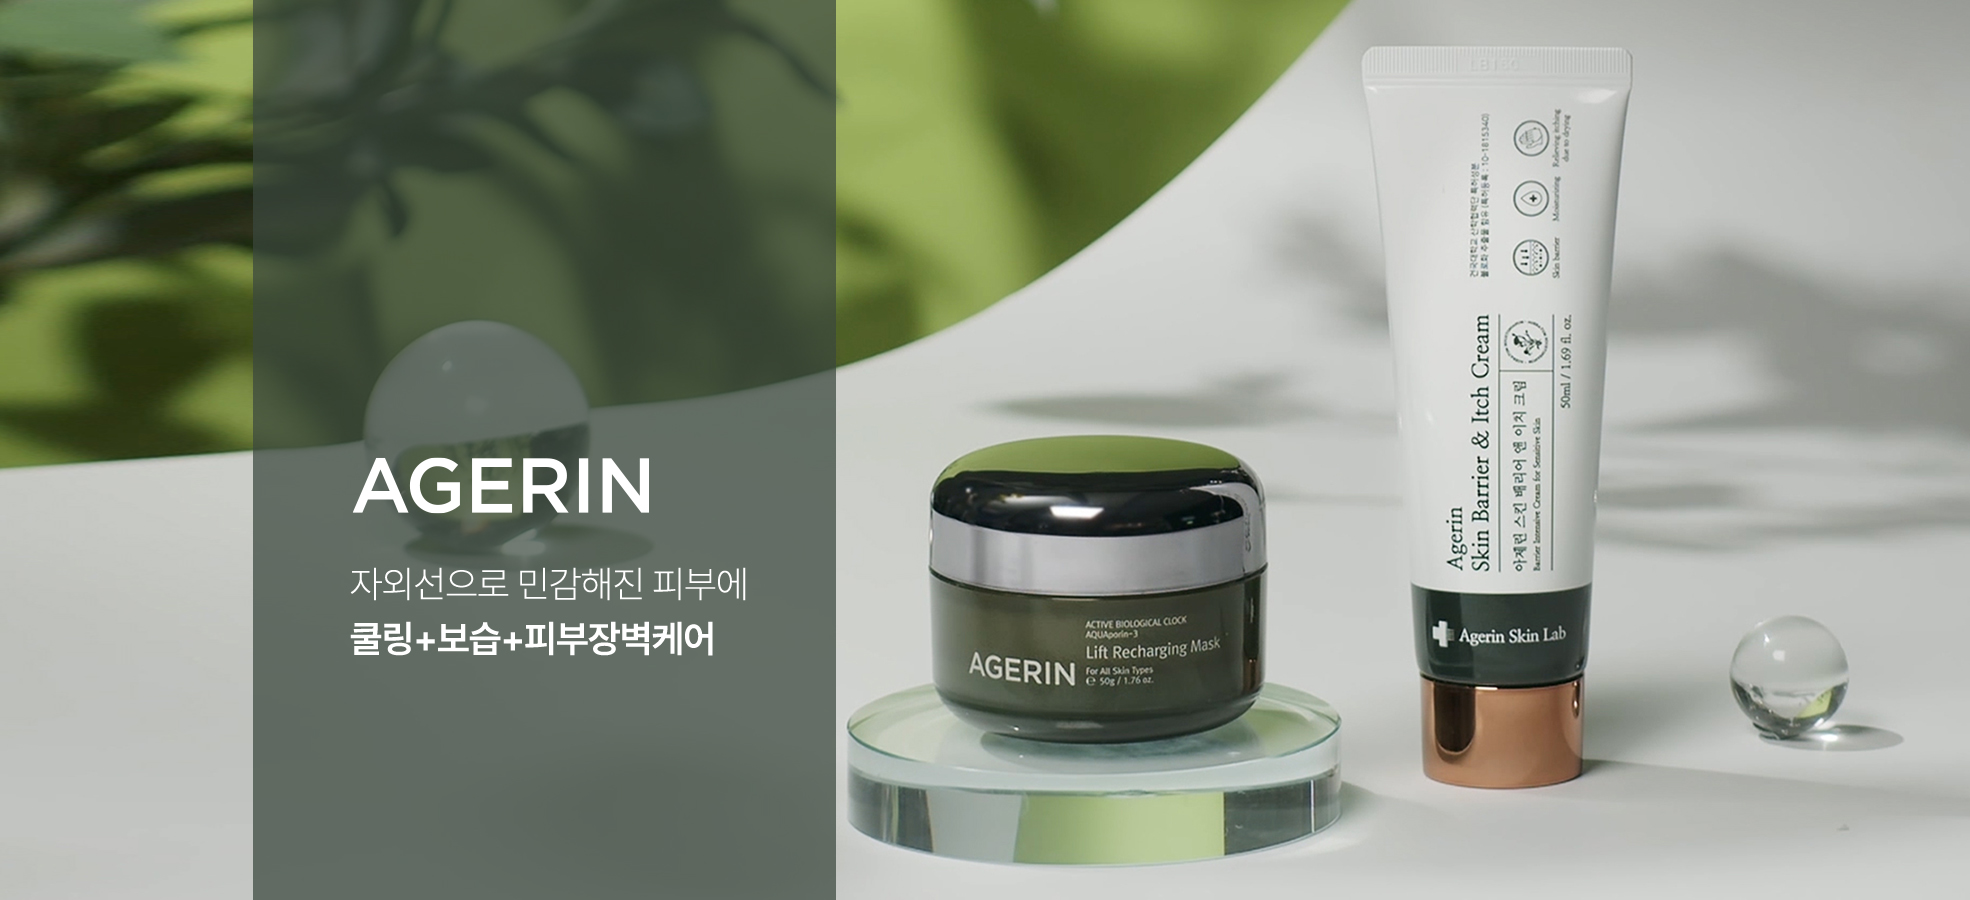 AGERIN Lift Recharging Mask + AGERIN Skin Barrier & Itch Cream